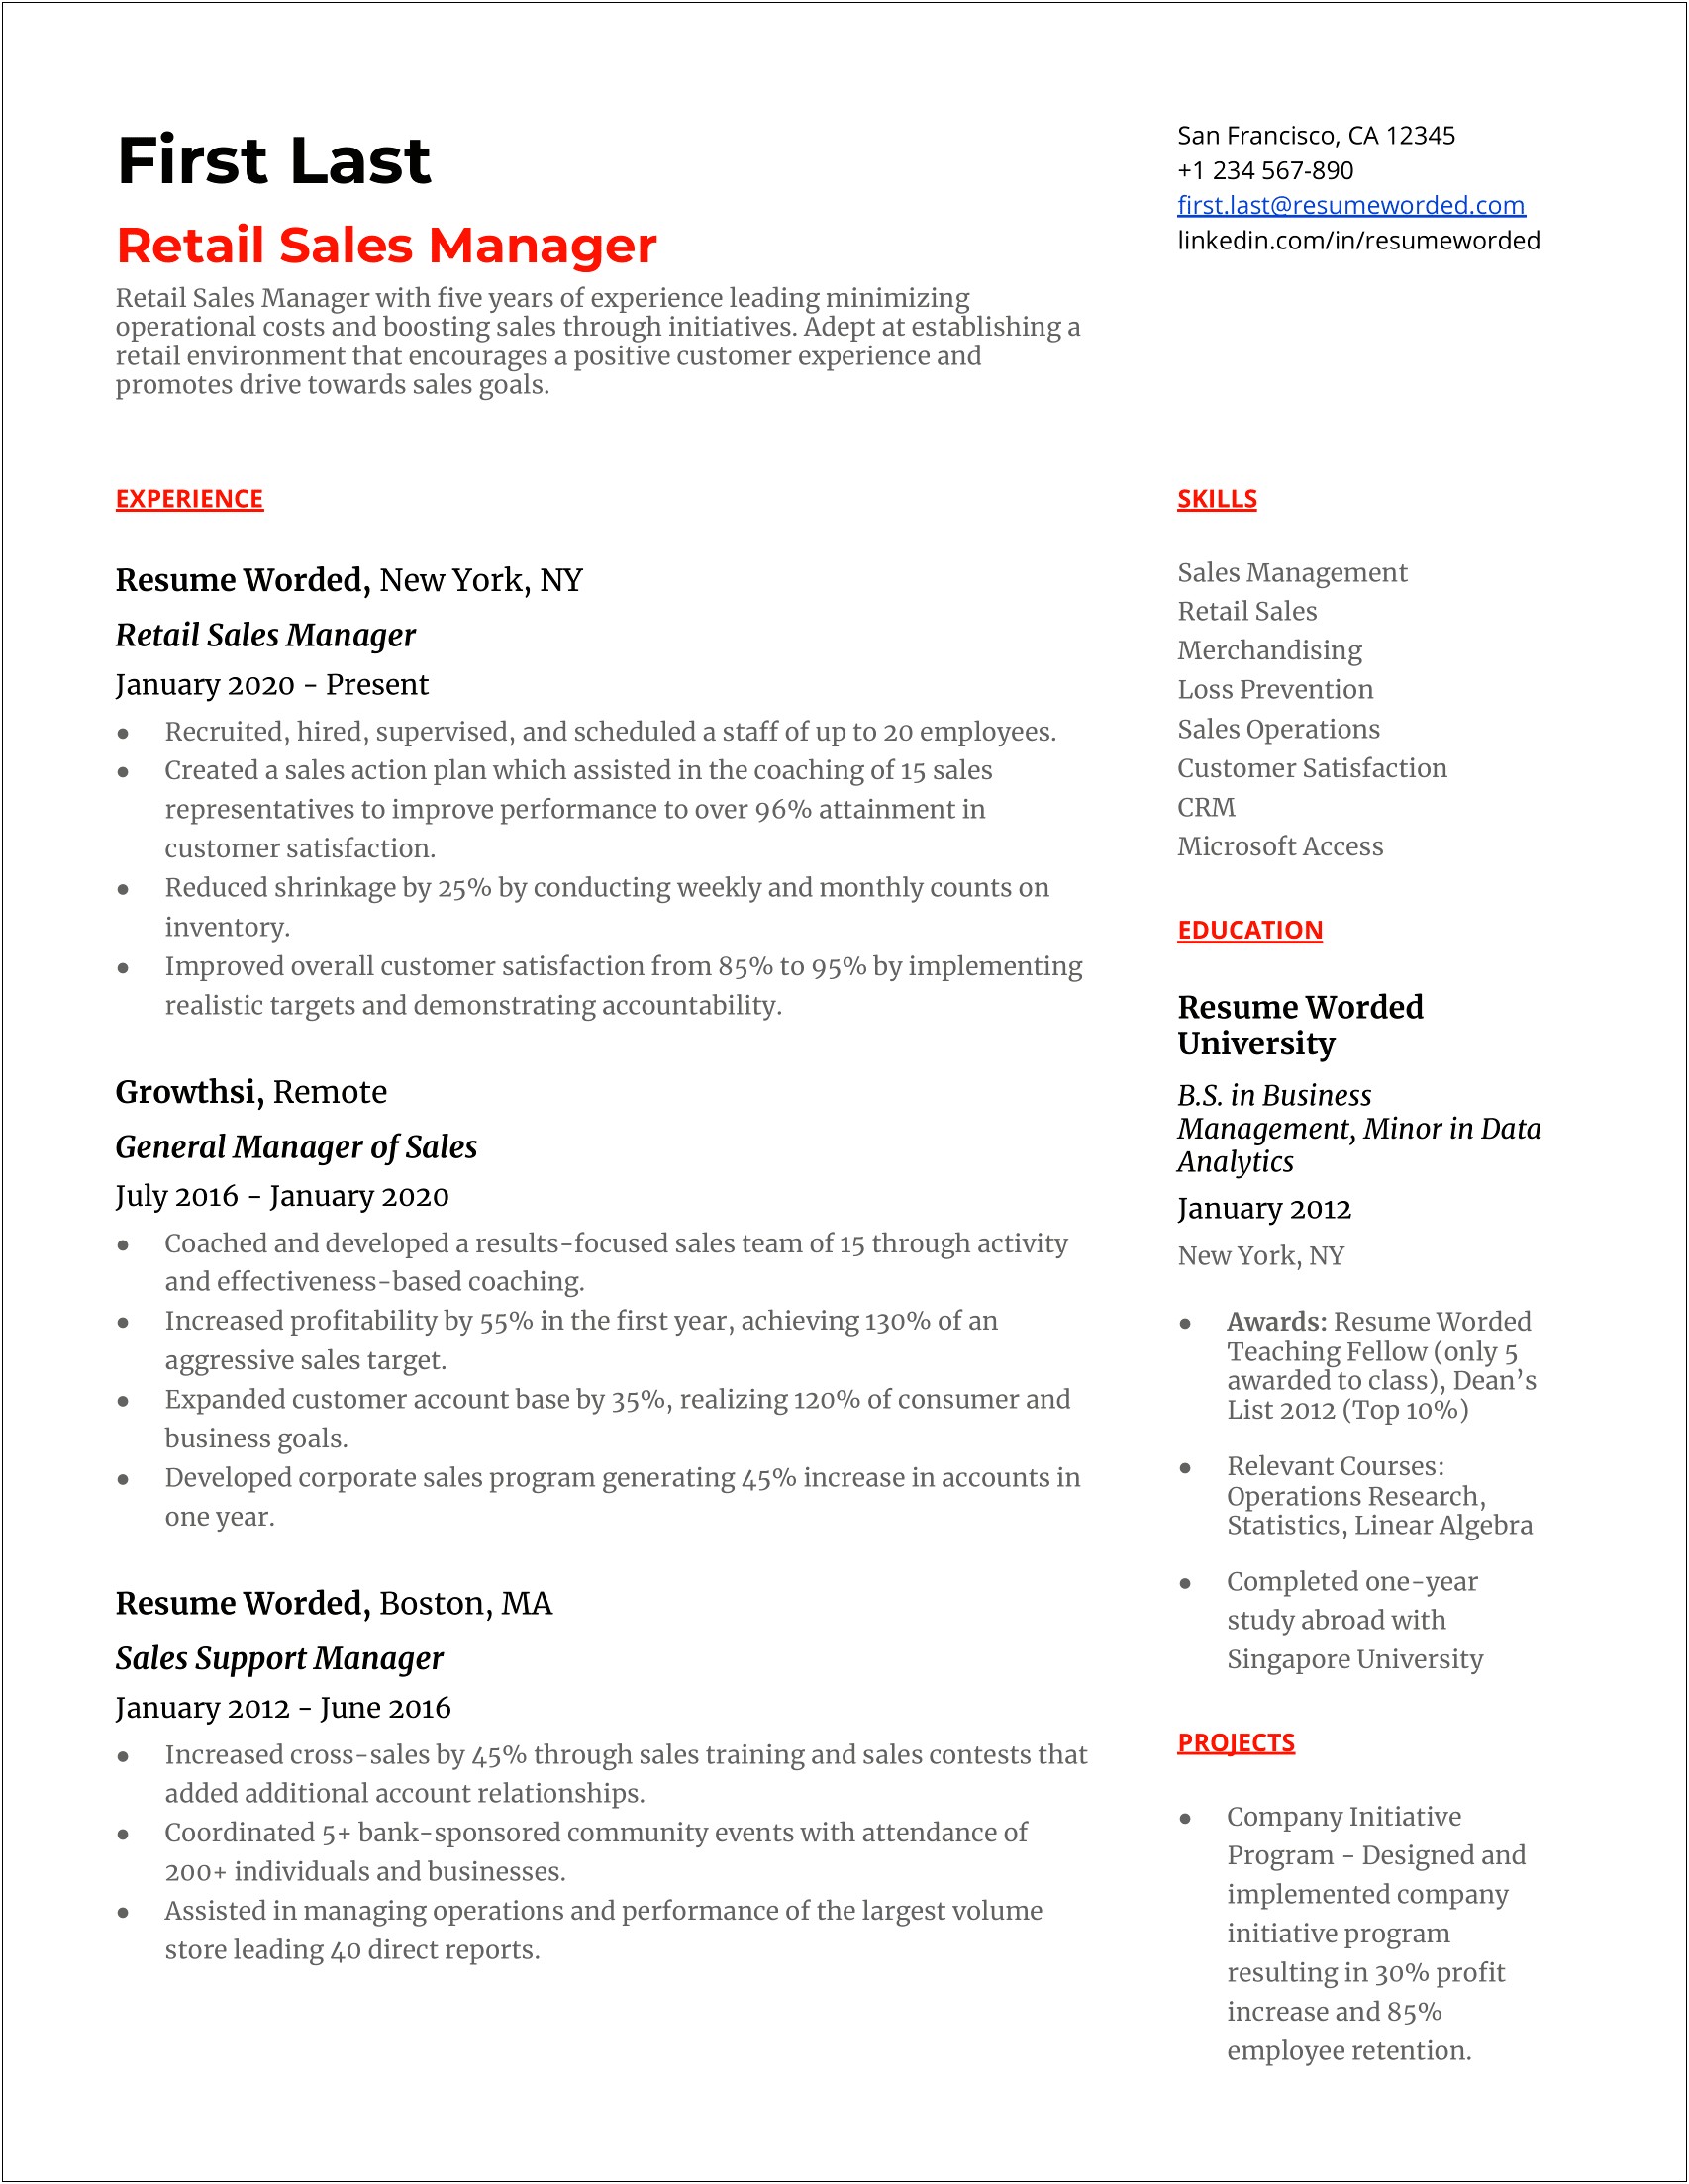 4 Years Of Experience Resume Pay Retail